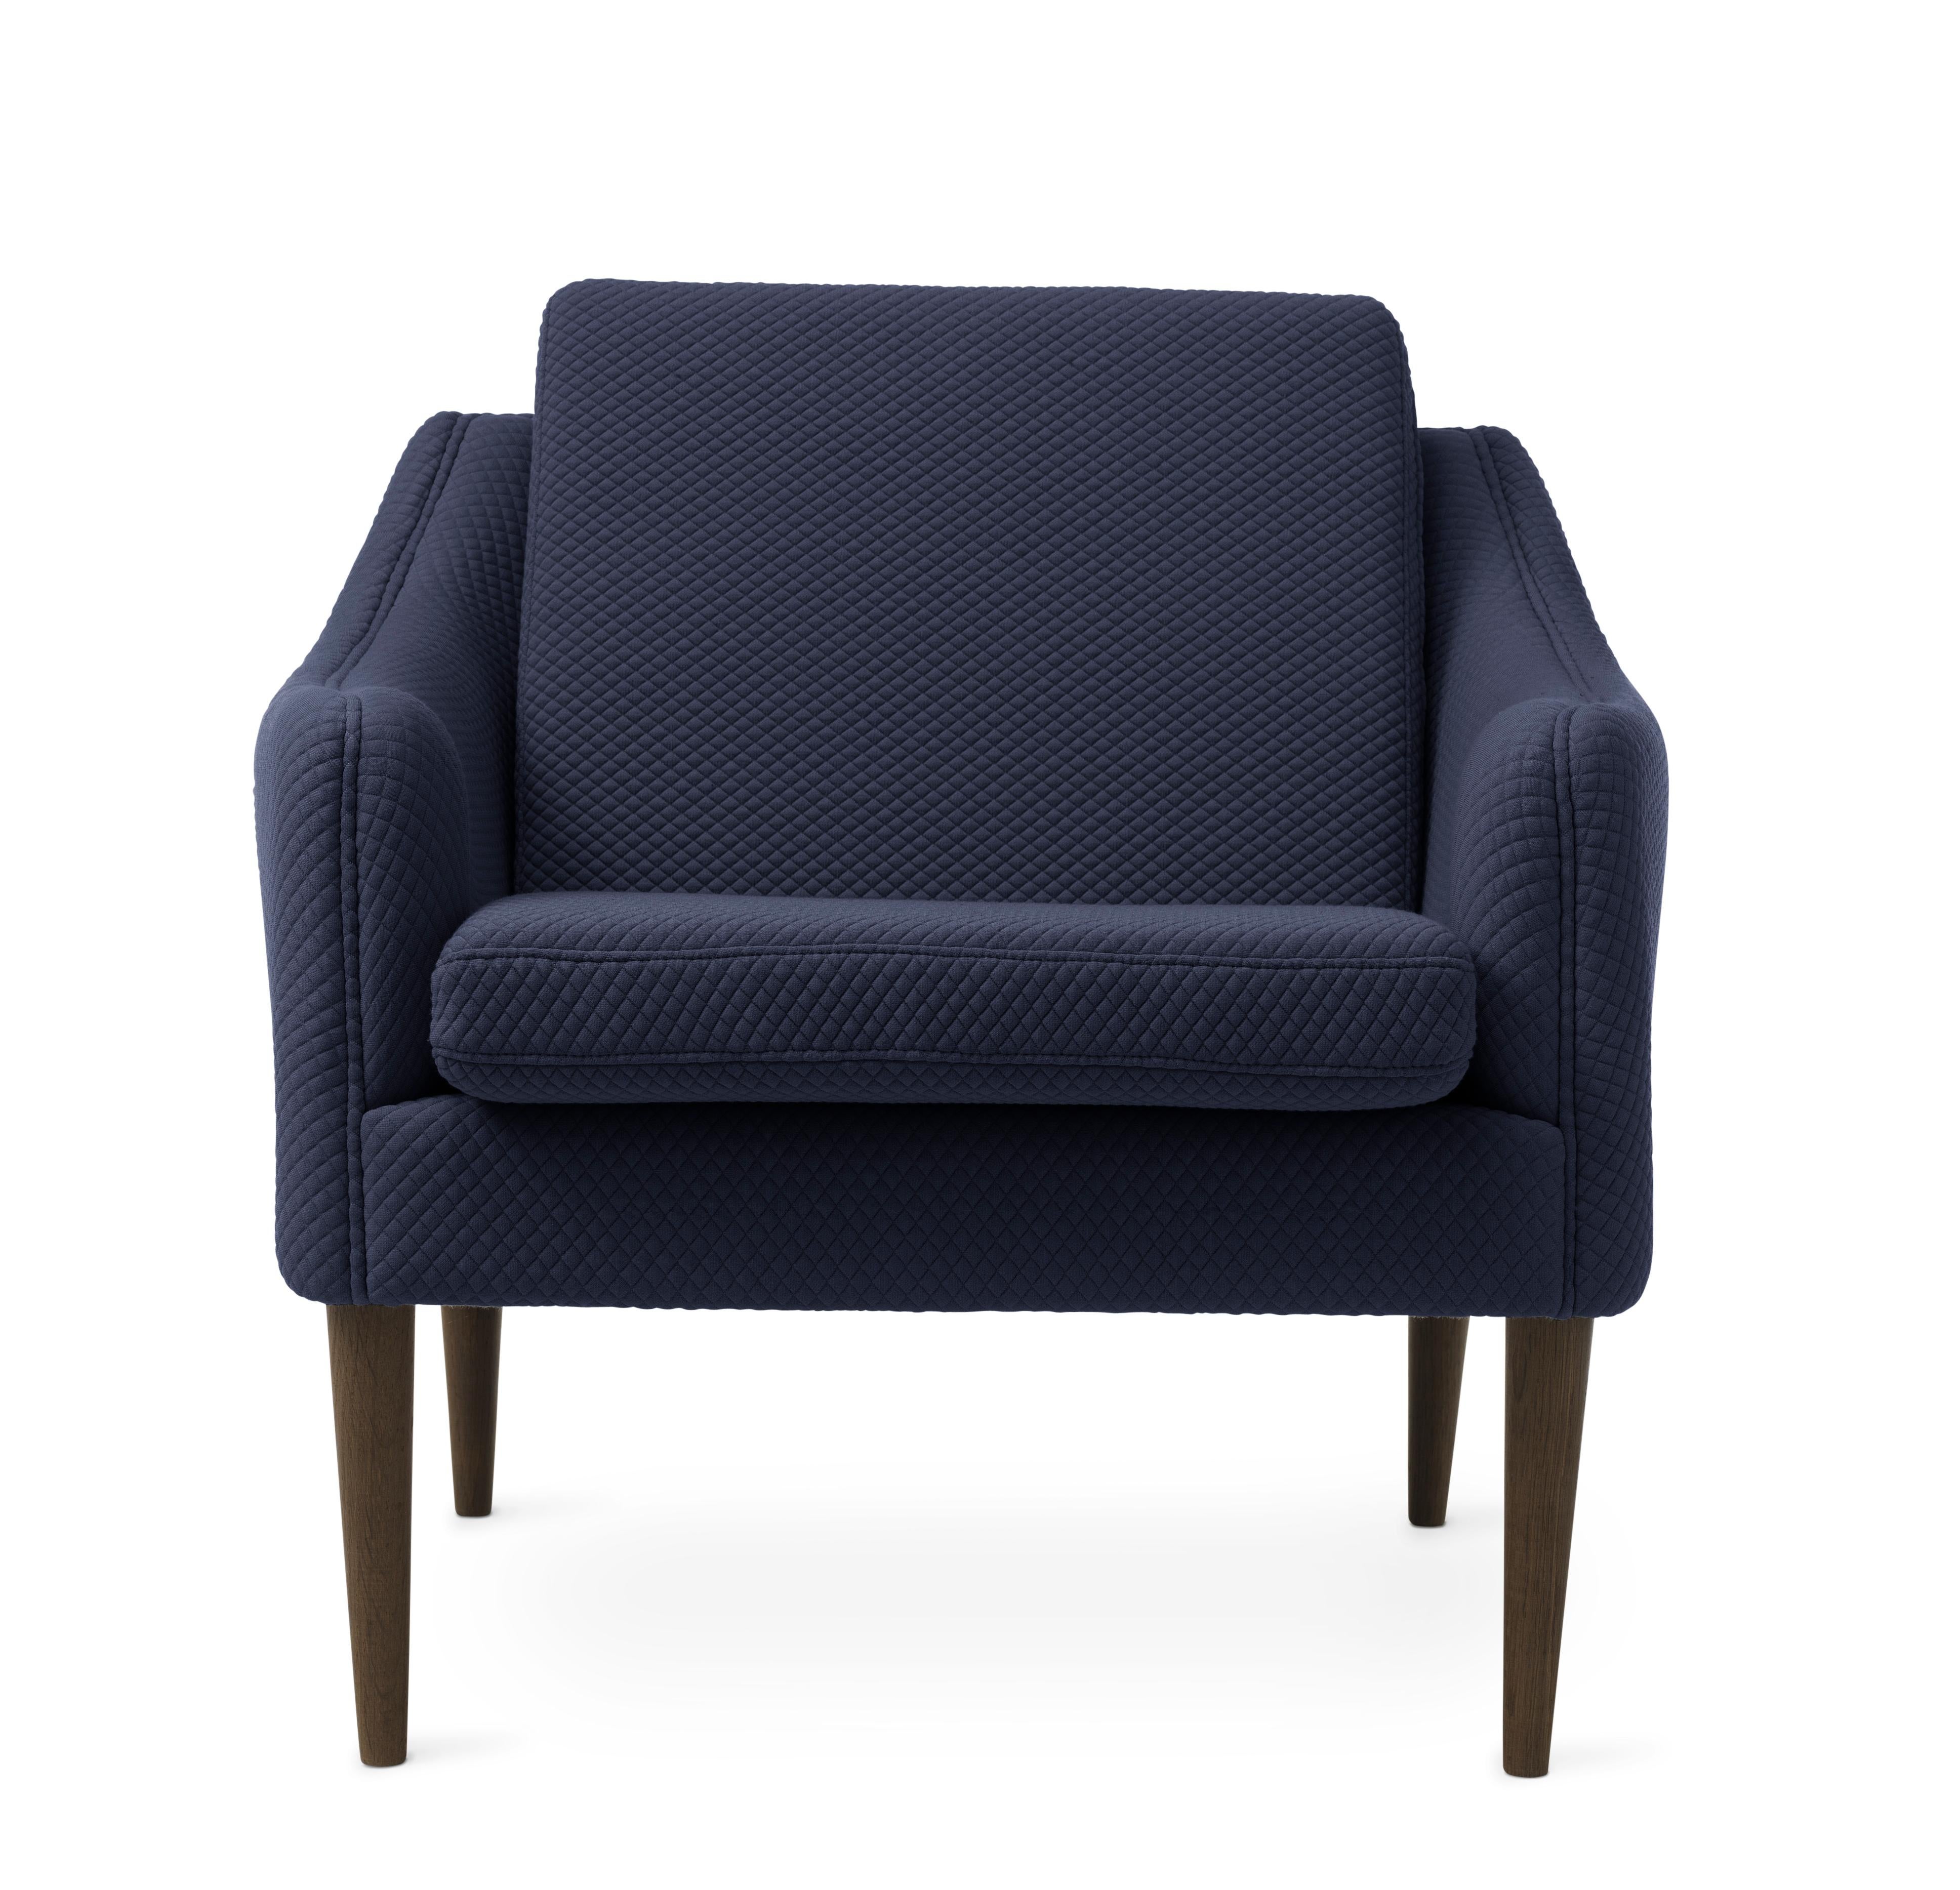 For Sale: Blue (Mosaic 692) Mr. Olsen Lounge Chair with Smoked Oak Legs, by Hans Olsen from Warm Nordic